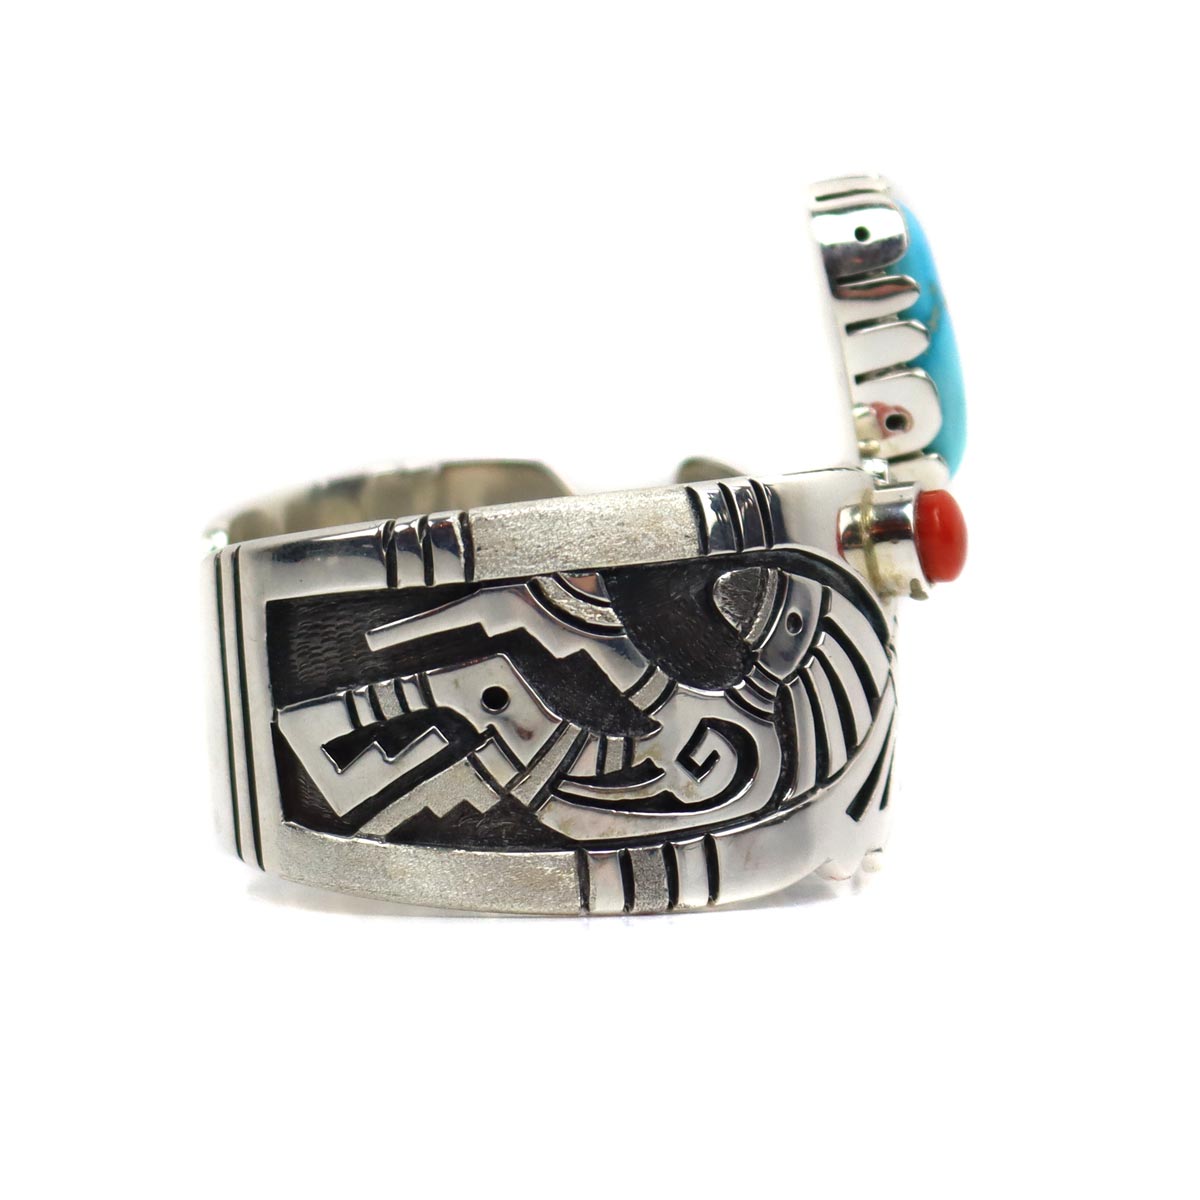 
Roy Talahaftewa - Hopi Contemporary Morenci Turquoise, Coral, and Sterling Silver Overlay Bracelet, size 6.75 (J15270) 1